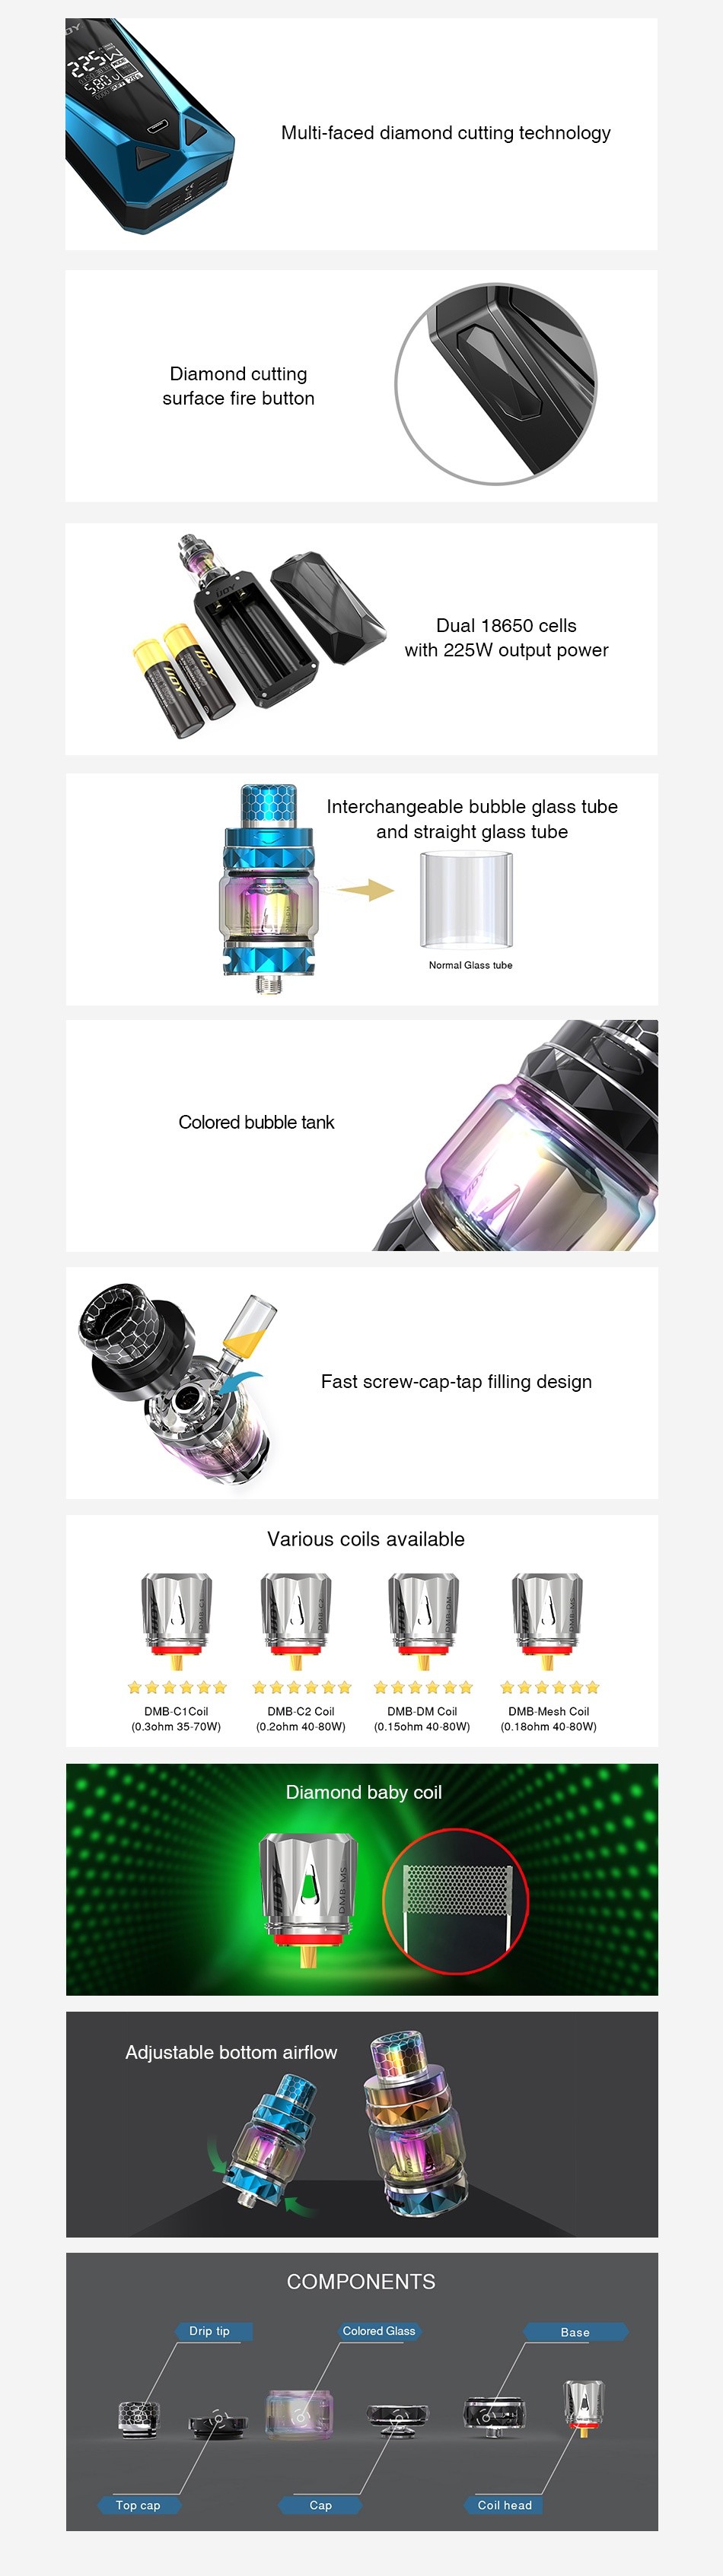 IJOY Diamond Mini 225W TC Kit Multi faced diamond cutting technology Diamond cutting surface fire button Dual 18650 CE with 225W output powel Interchangeable bubble glass tube and straight glass tube Colored bubble tank design Various coils available                      DME Mesh c nw  D 15ahm 40 80 0  10  18chm 40 aCw  Adjustable bottom airflow COMPONENTS